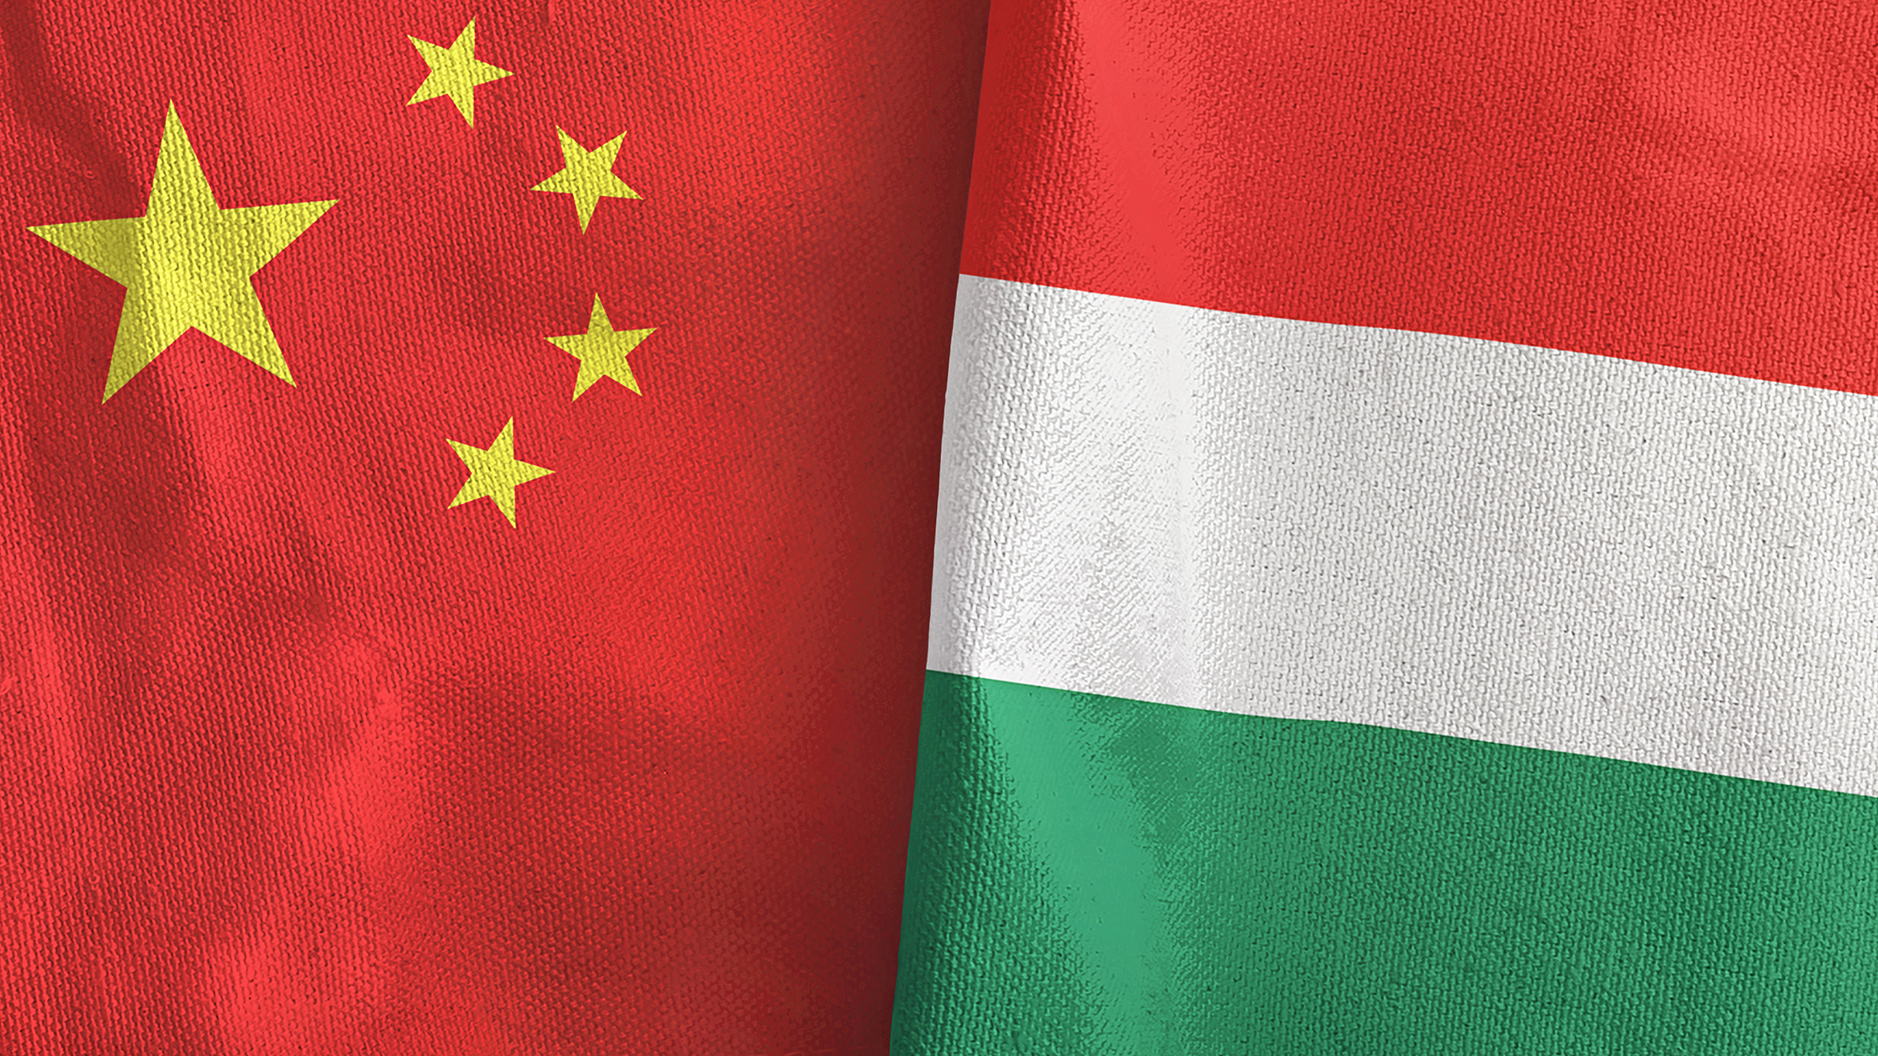 Hungary in Talks on Attracting More Chinese Investments - Sz...